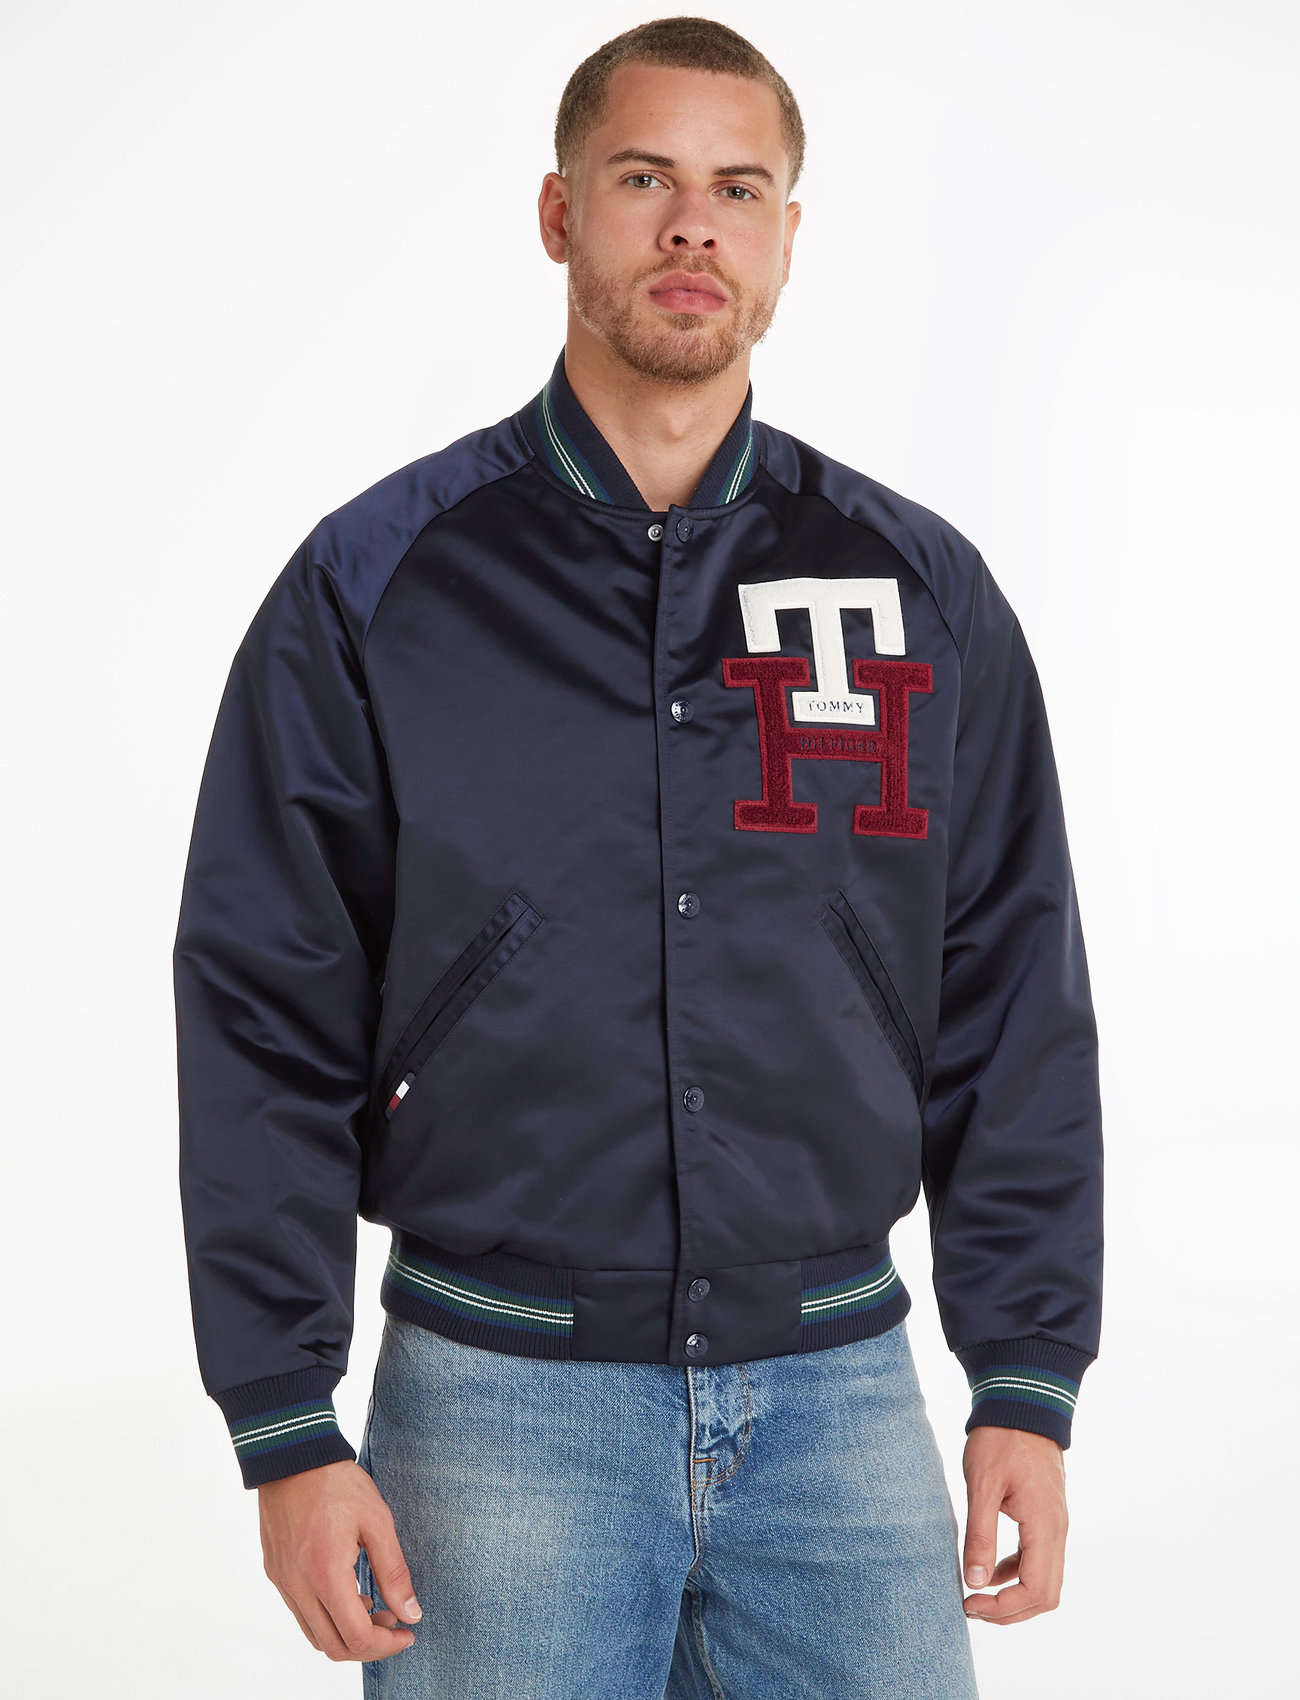 Editor midnat sende Tommy Hilfiger Varsity Jacket - 349.90 €. Buy Varsety jacket from Tommy  Hilfiger online at Boozt.com. Fast delivery and easy returns